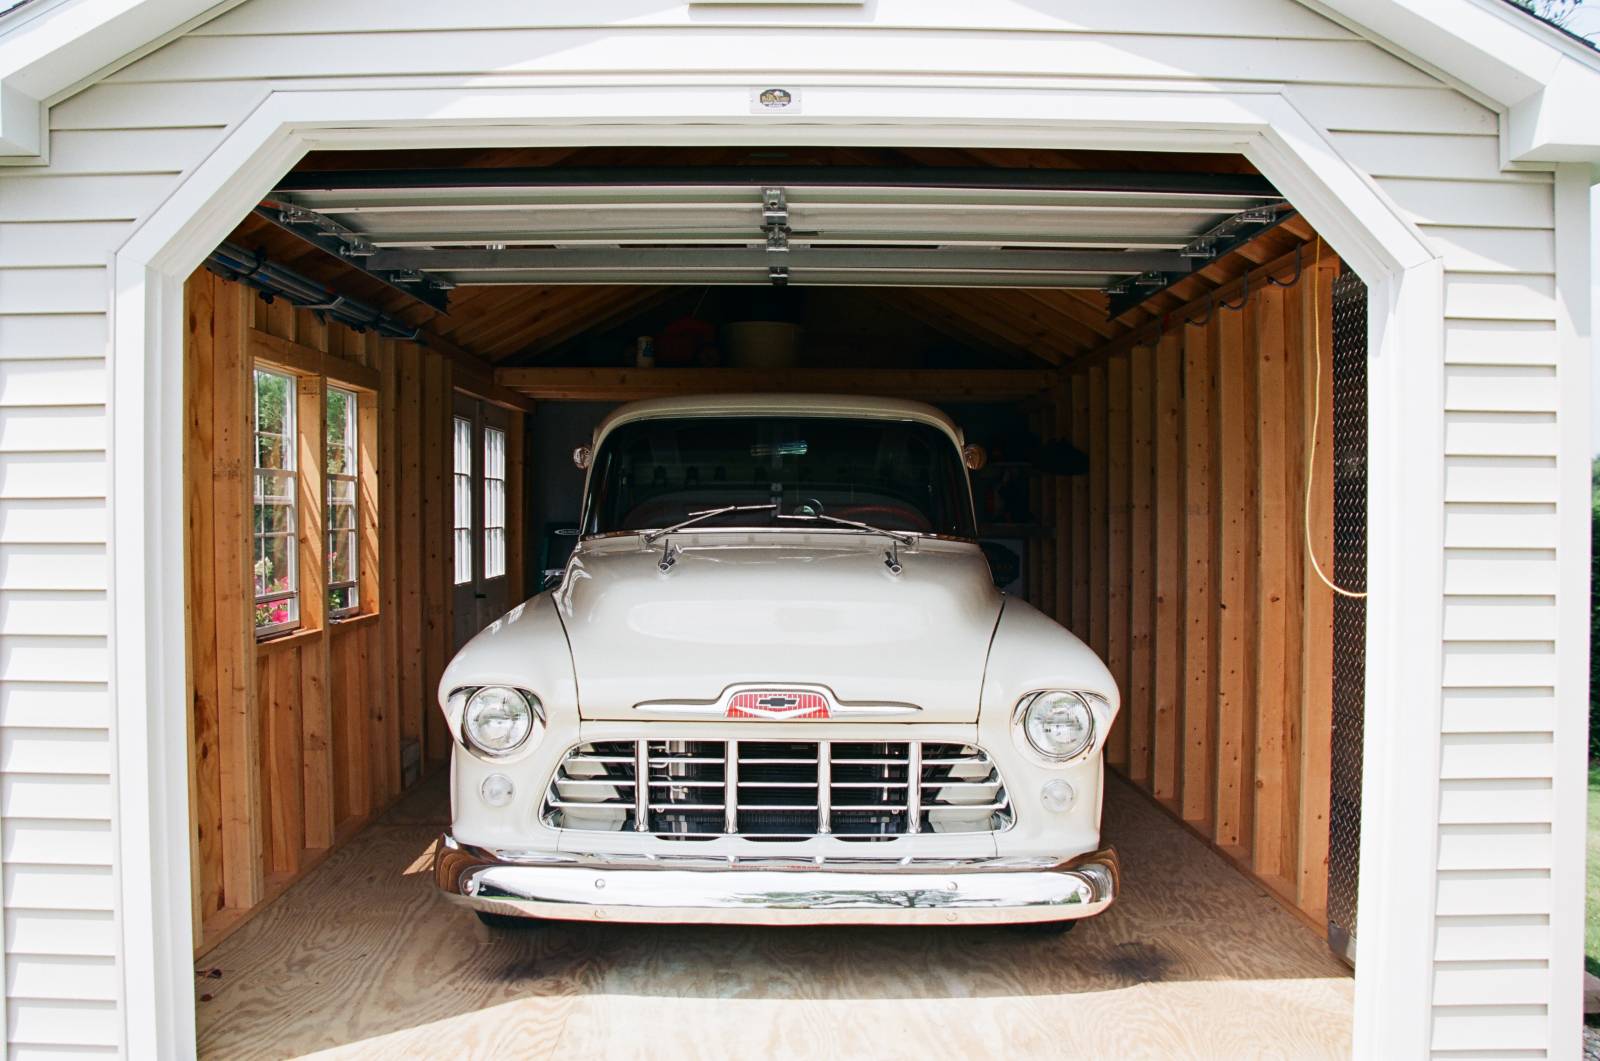 Plenty of space for a classic car in this Traditional Cape Garage with Super Floor